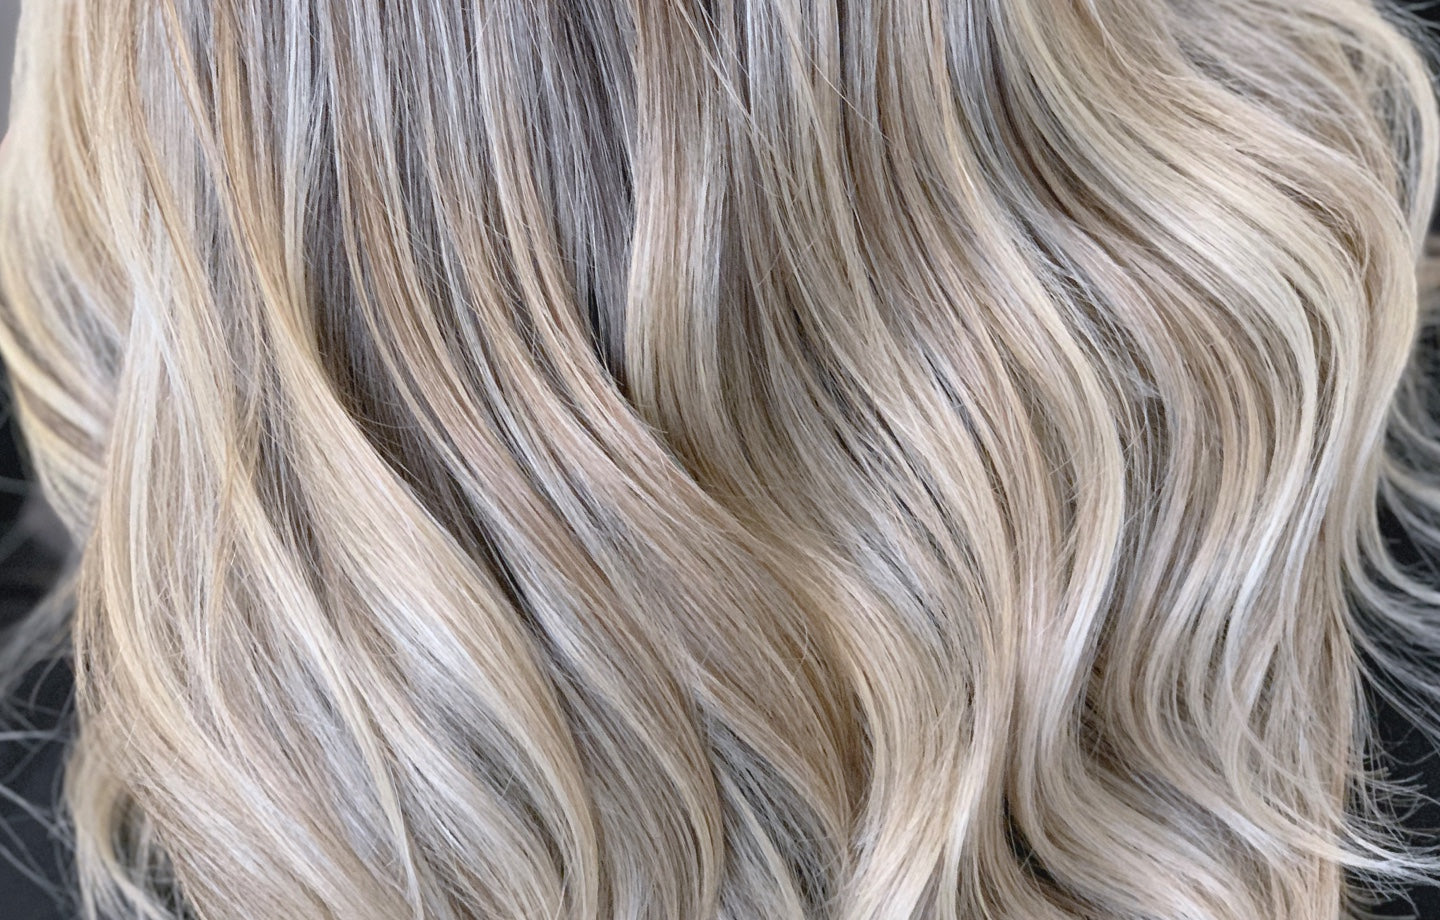 3. "The Best Products for Maintaining Icy Platinum Blonde Hair" - wide 5